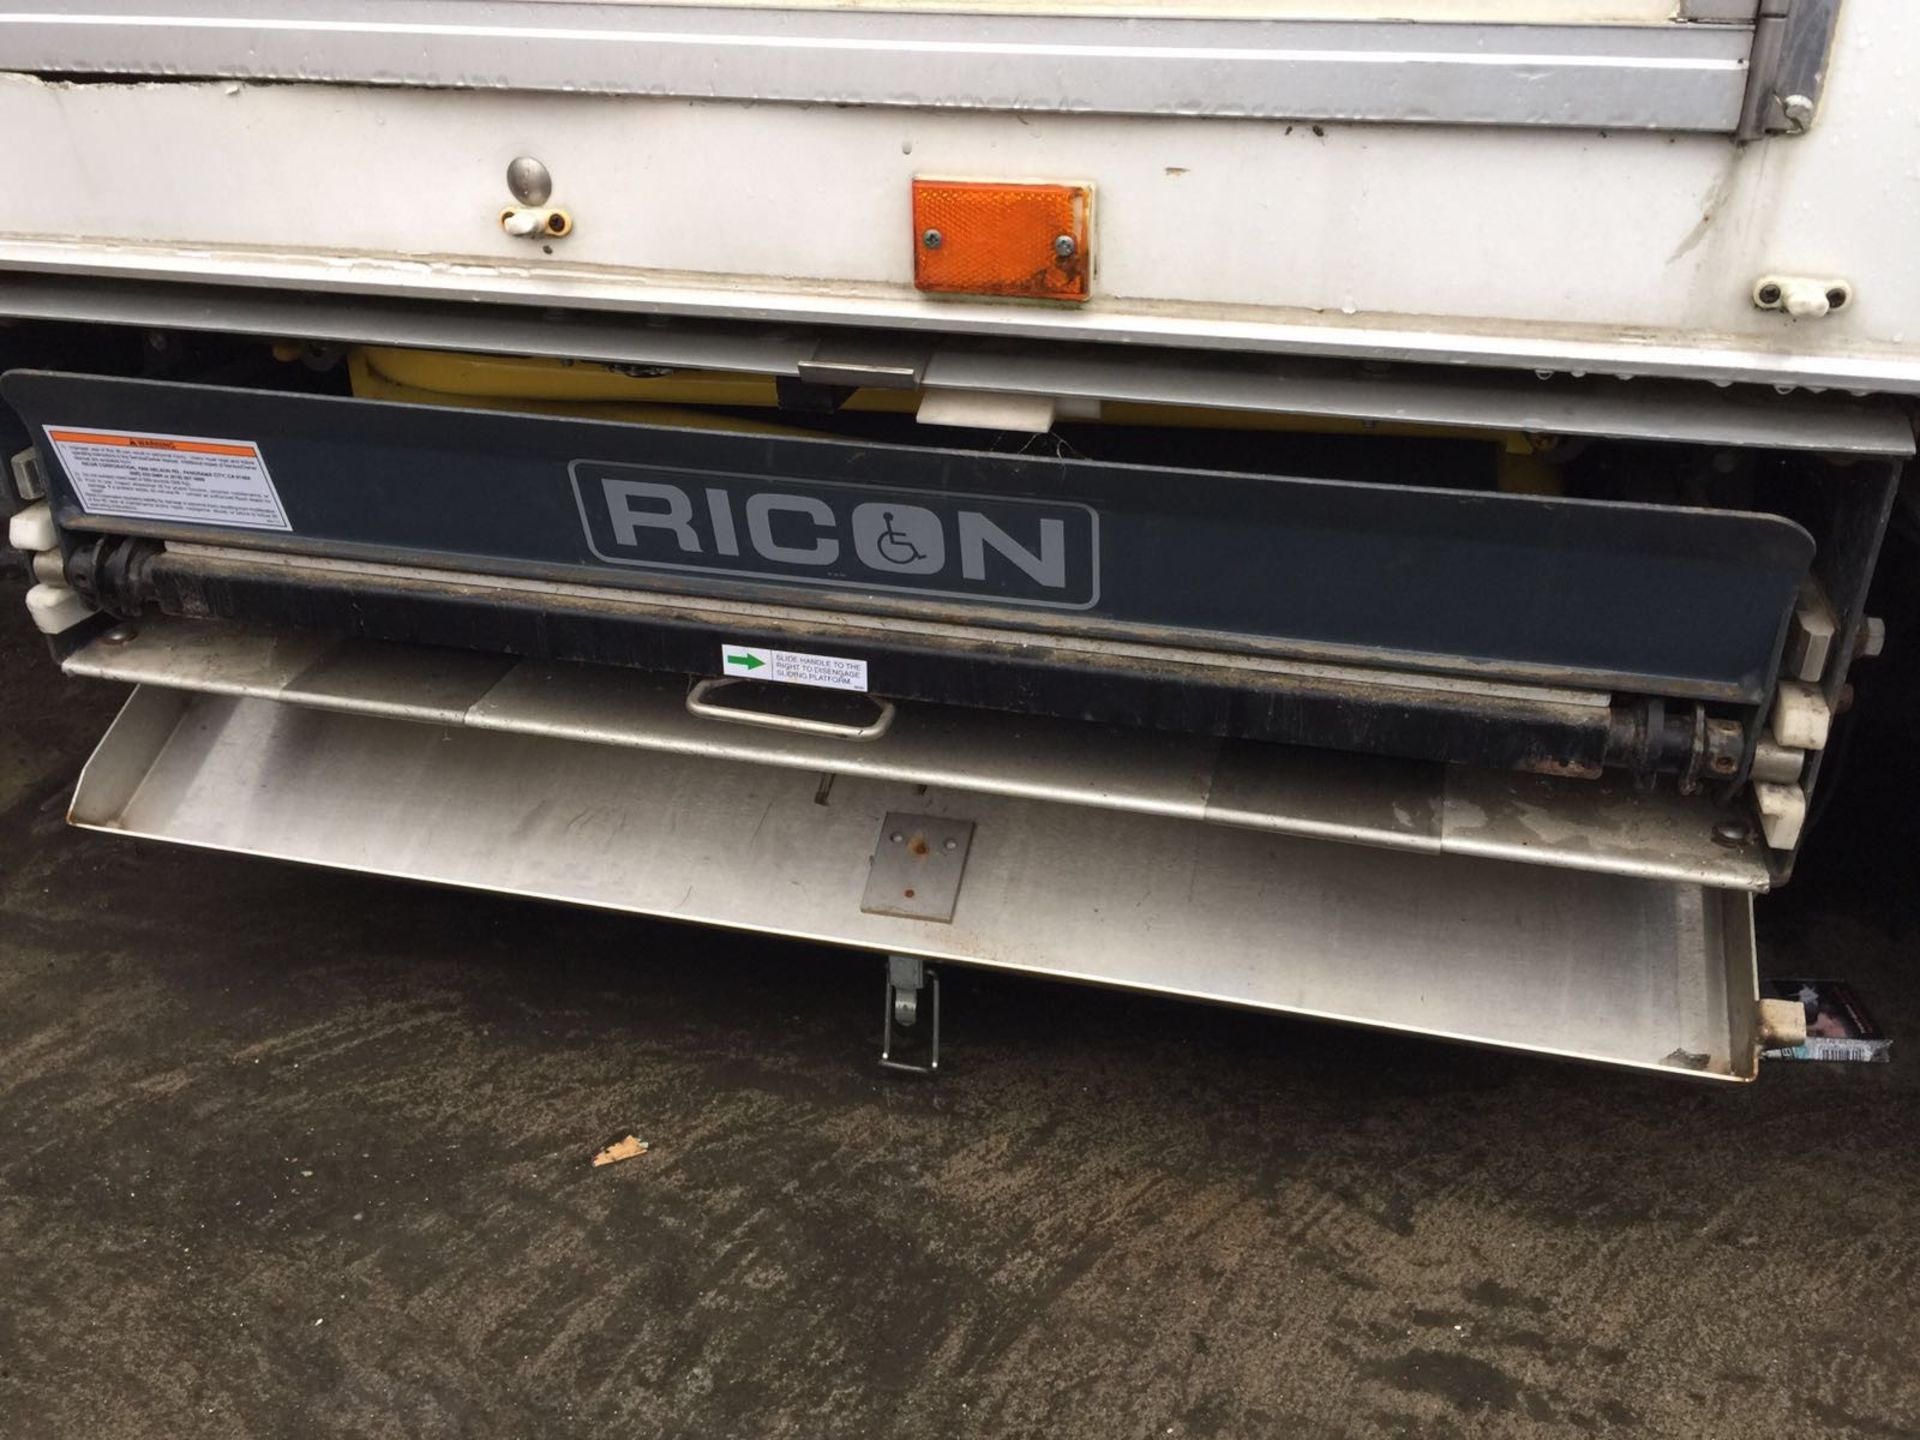 TWIN AXLE EXHIBITION / CATERING TRAILER WITH RICON DISABLED LIFT - Image 11 of 30